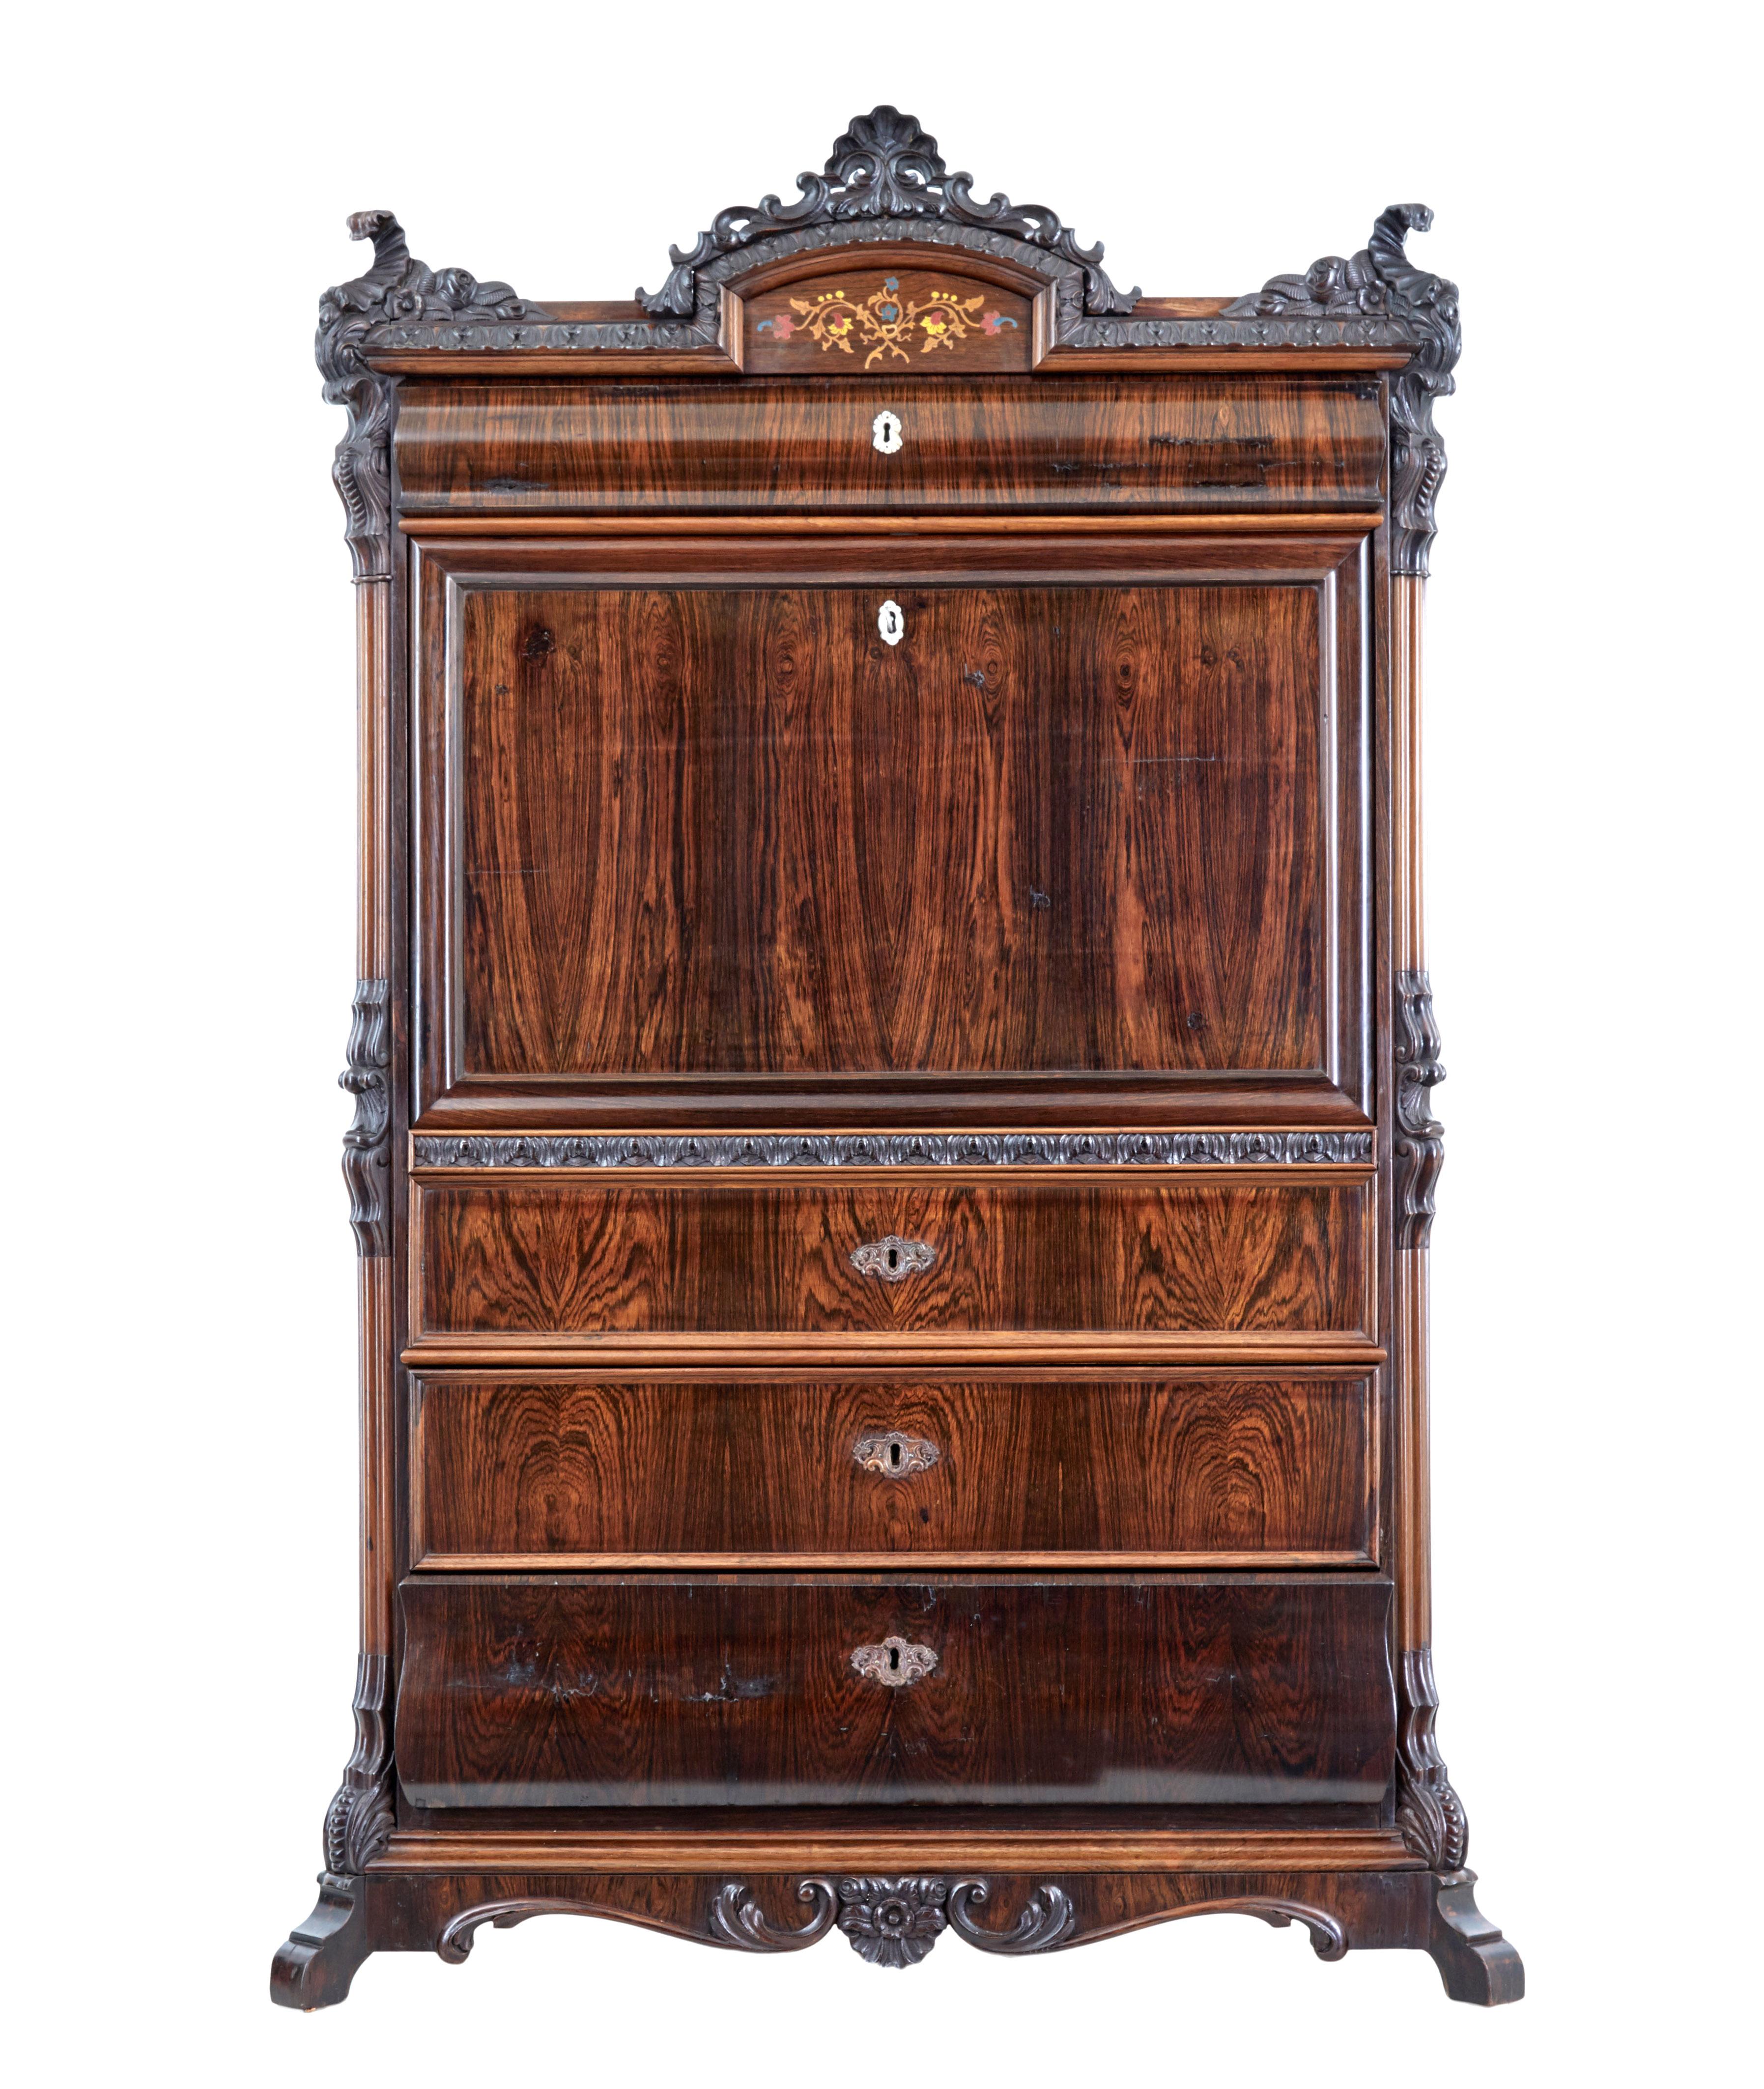 19th century Italian carved palisander escritoire circa 1880.

Nice smaller proportions on this piece, which lends itself to being able to be used in more rooms around the home.

Carved cornice with inlay. Large full width drawer, below which